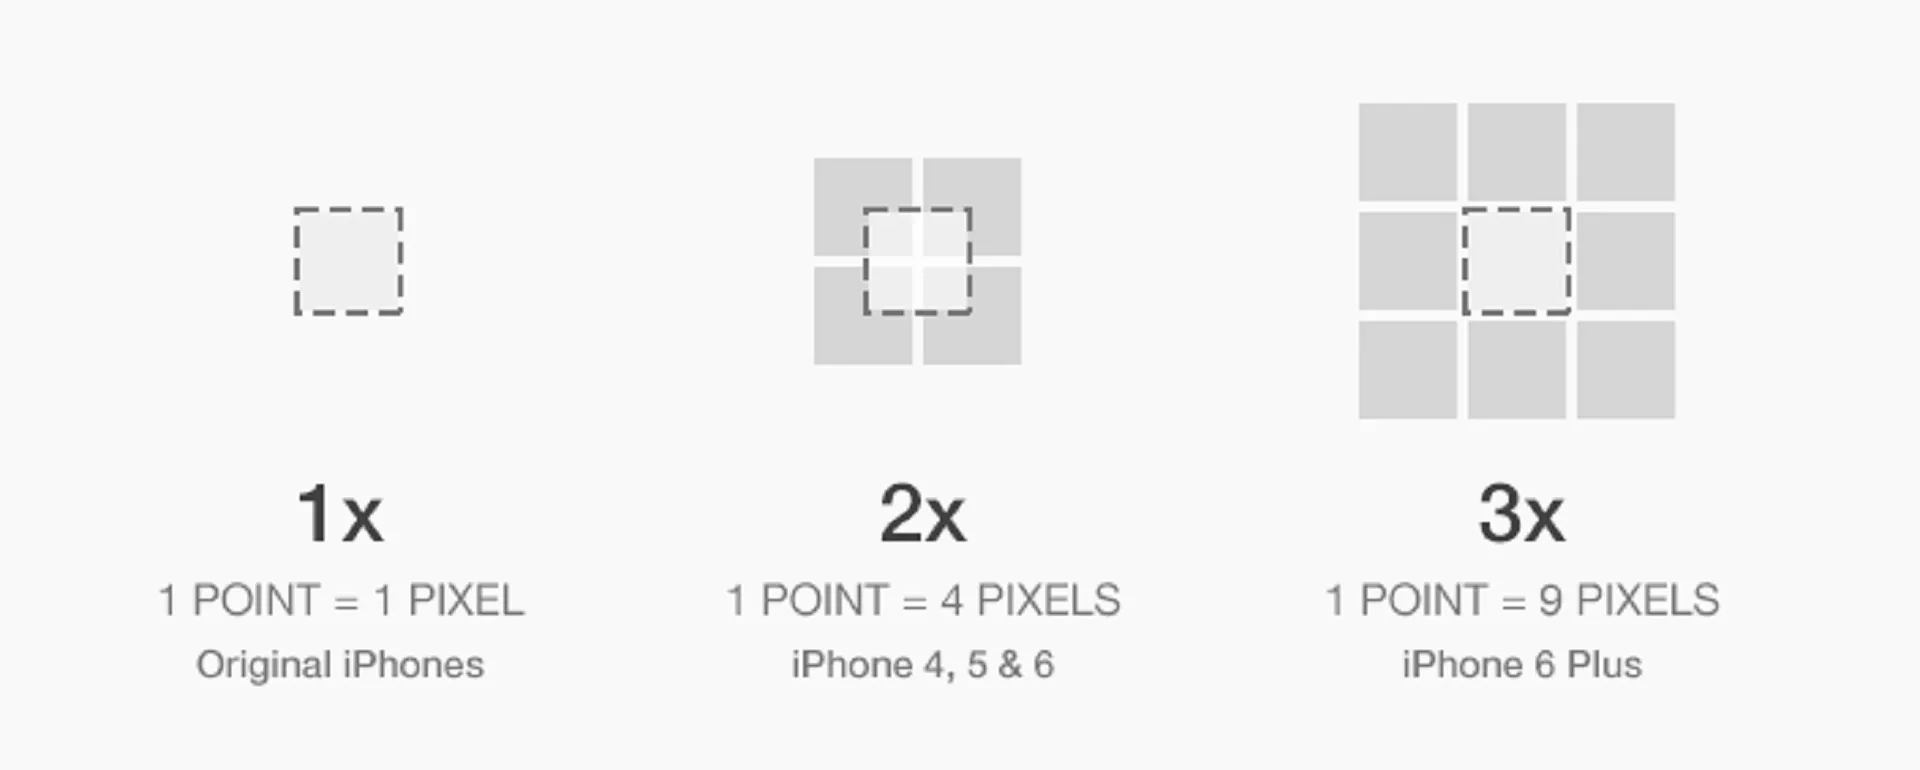 Understanding Key Terms Involved in iPhone Screen Resolutions and Sizes